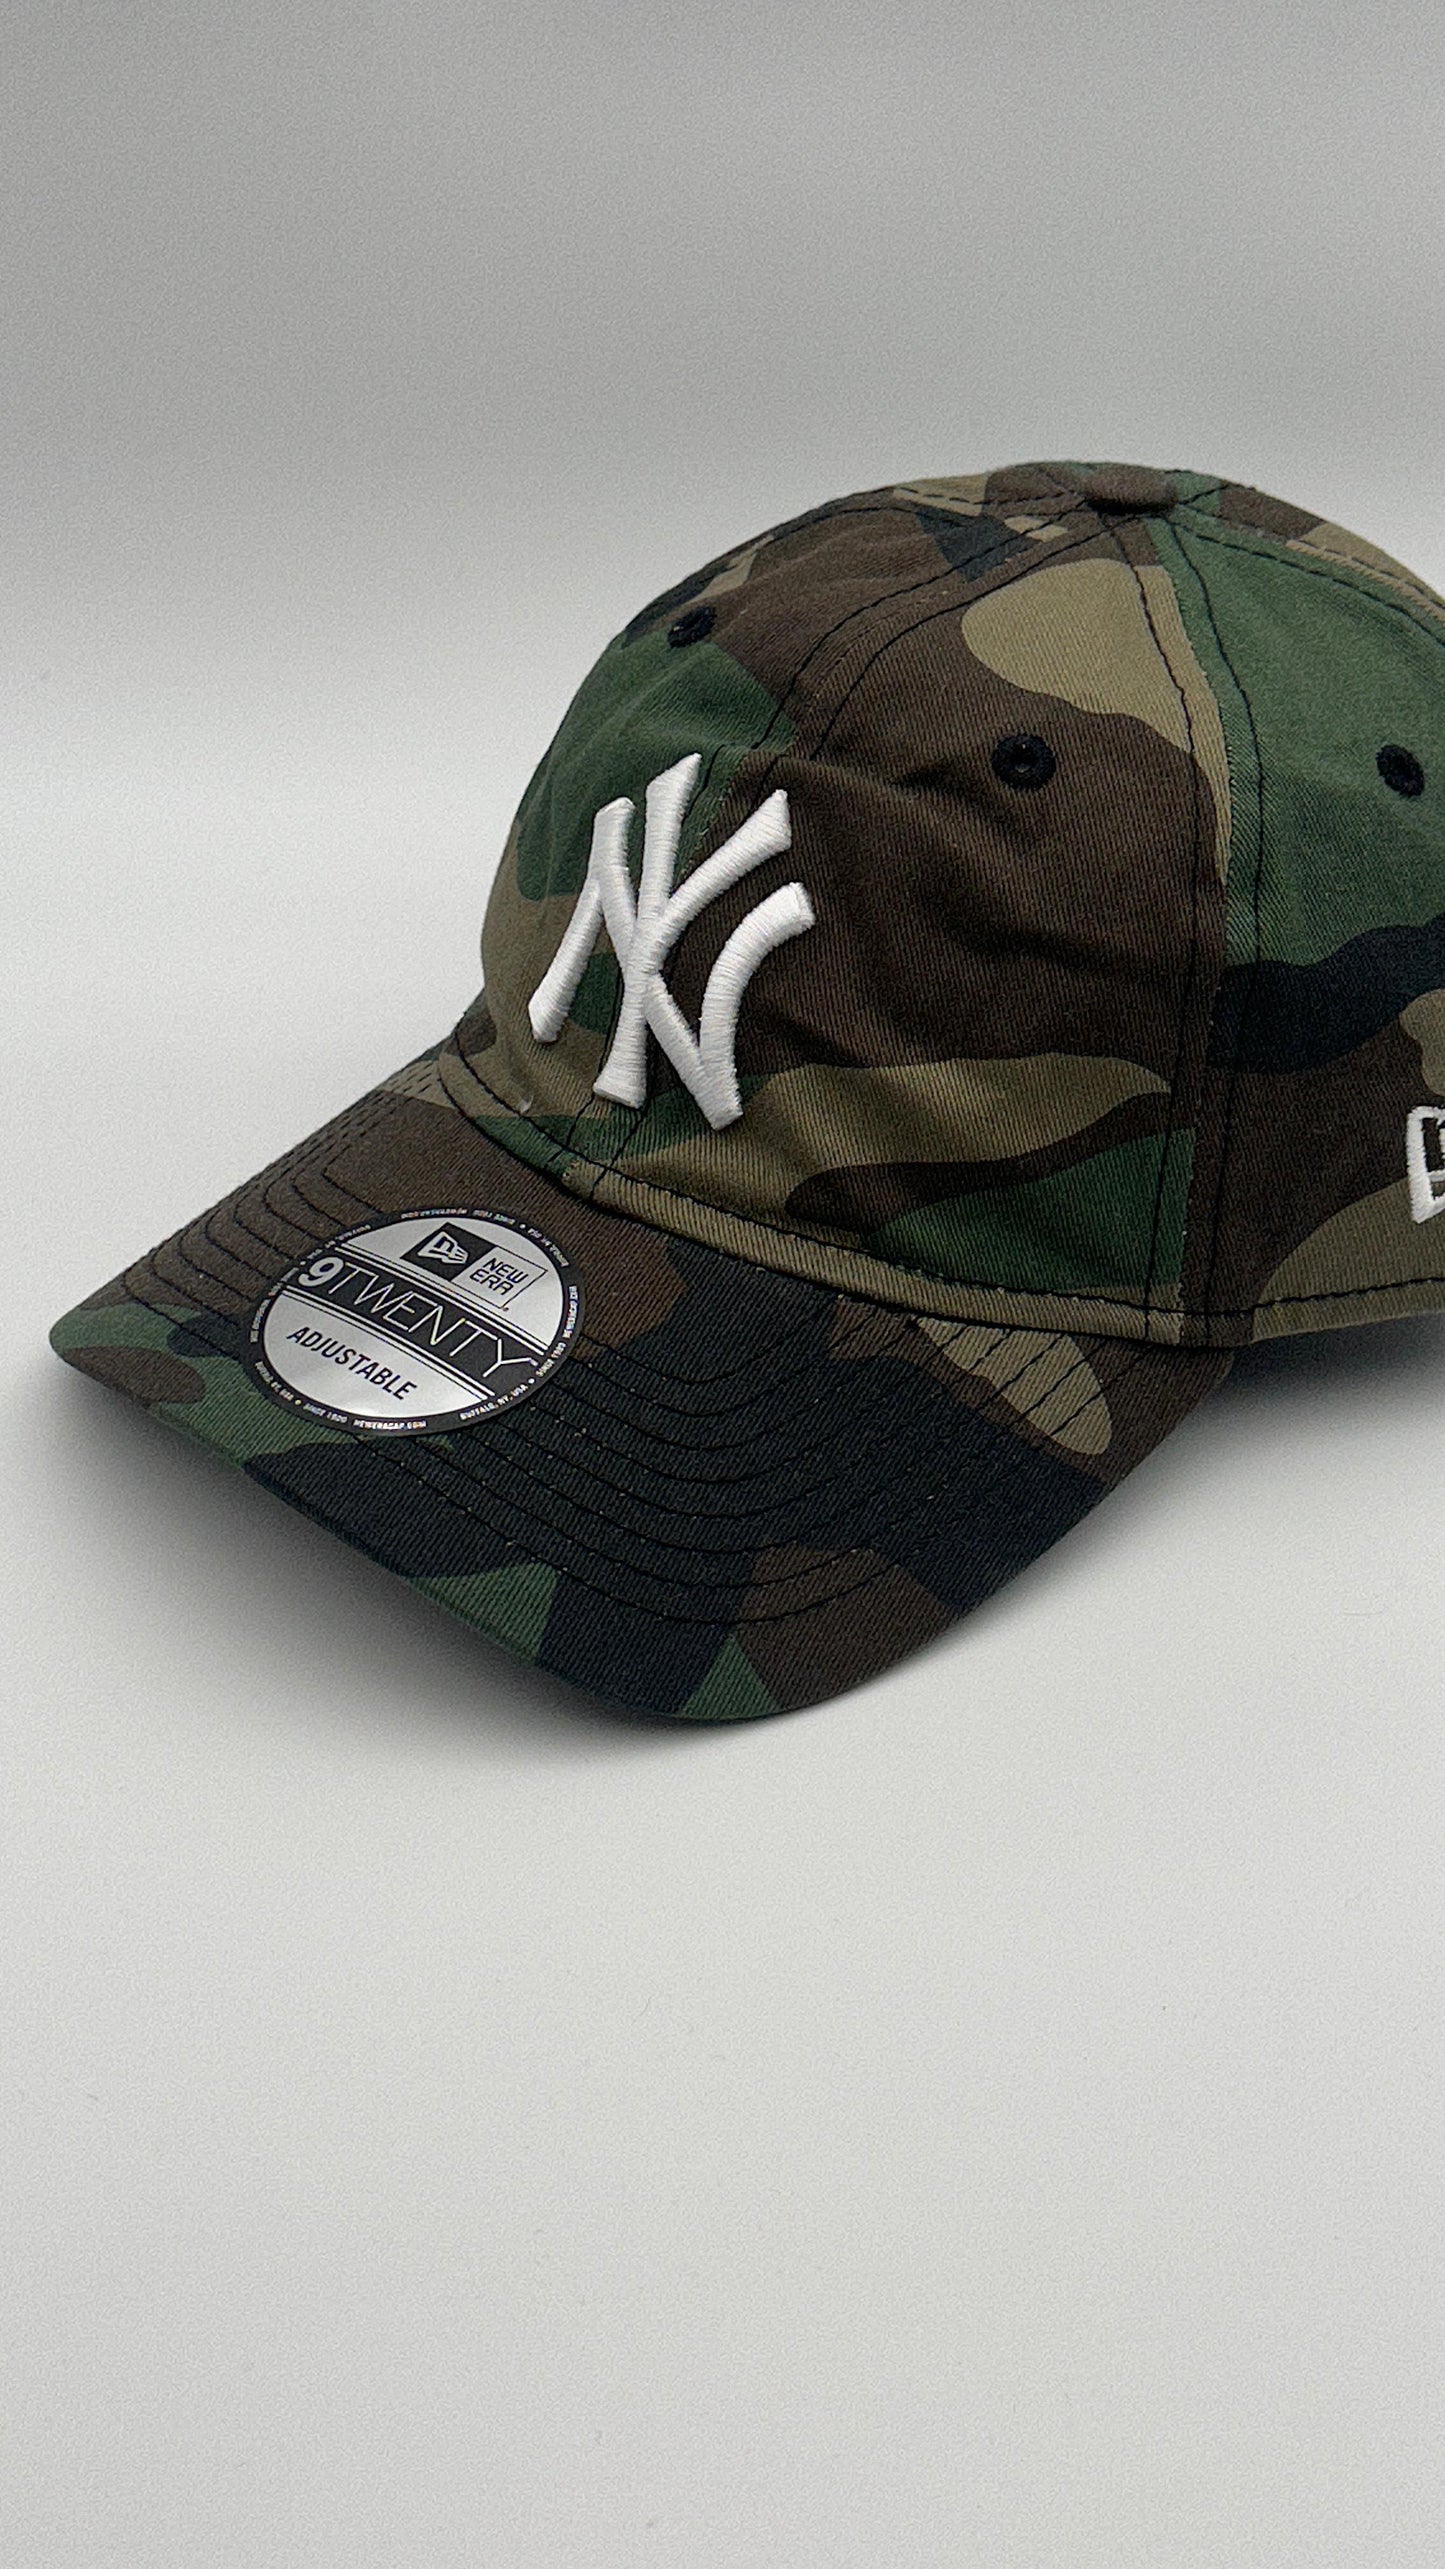 NEW YORK Cap “Army” - Butterfly Sneakers